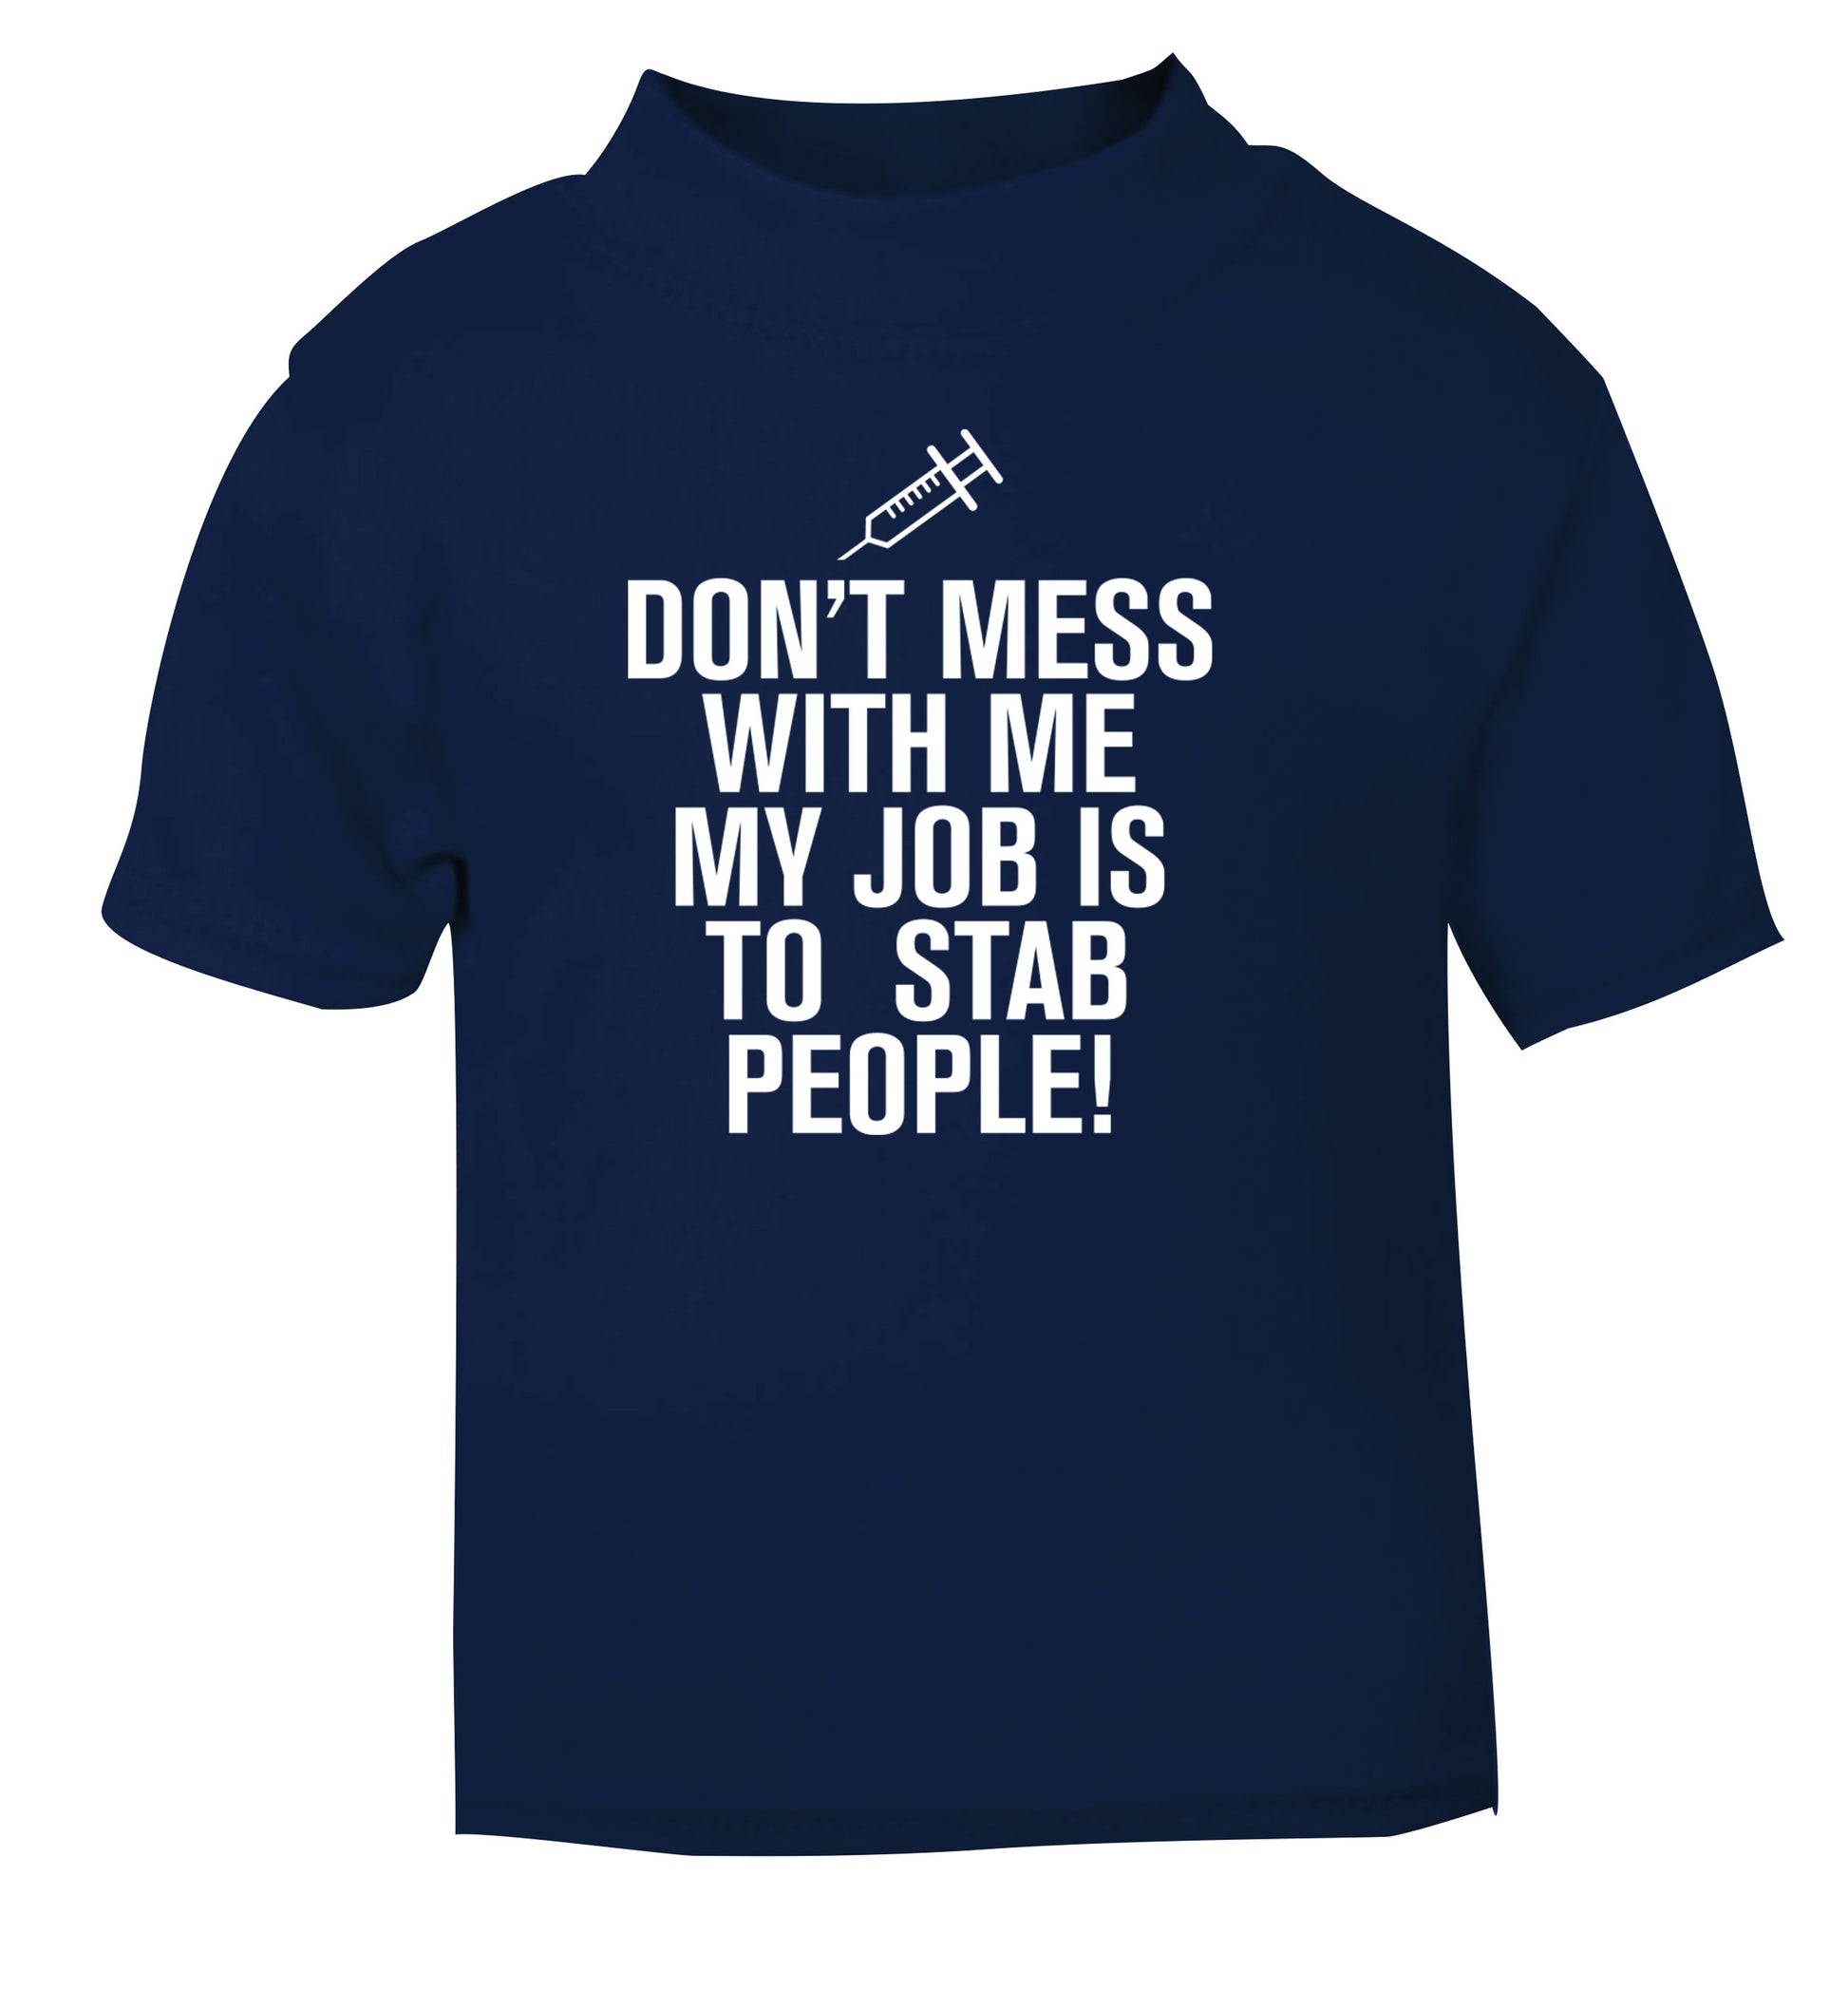 Don't mess with me my job is to stab people! navy Baby Toddler Tshirt 2 Years